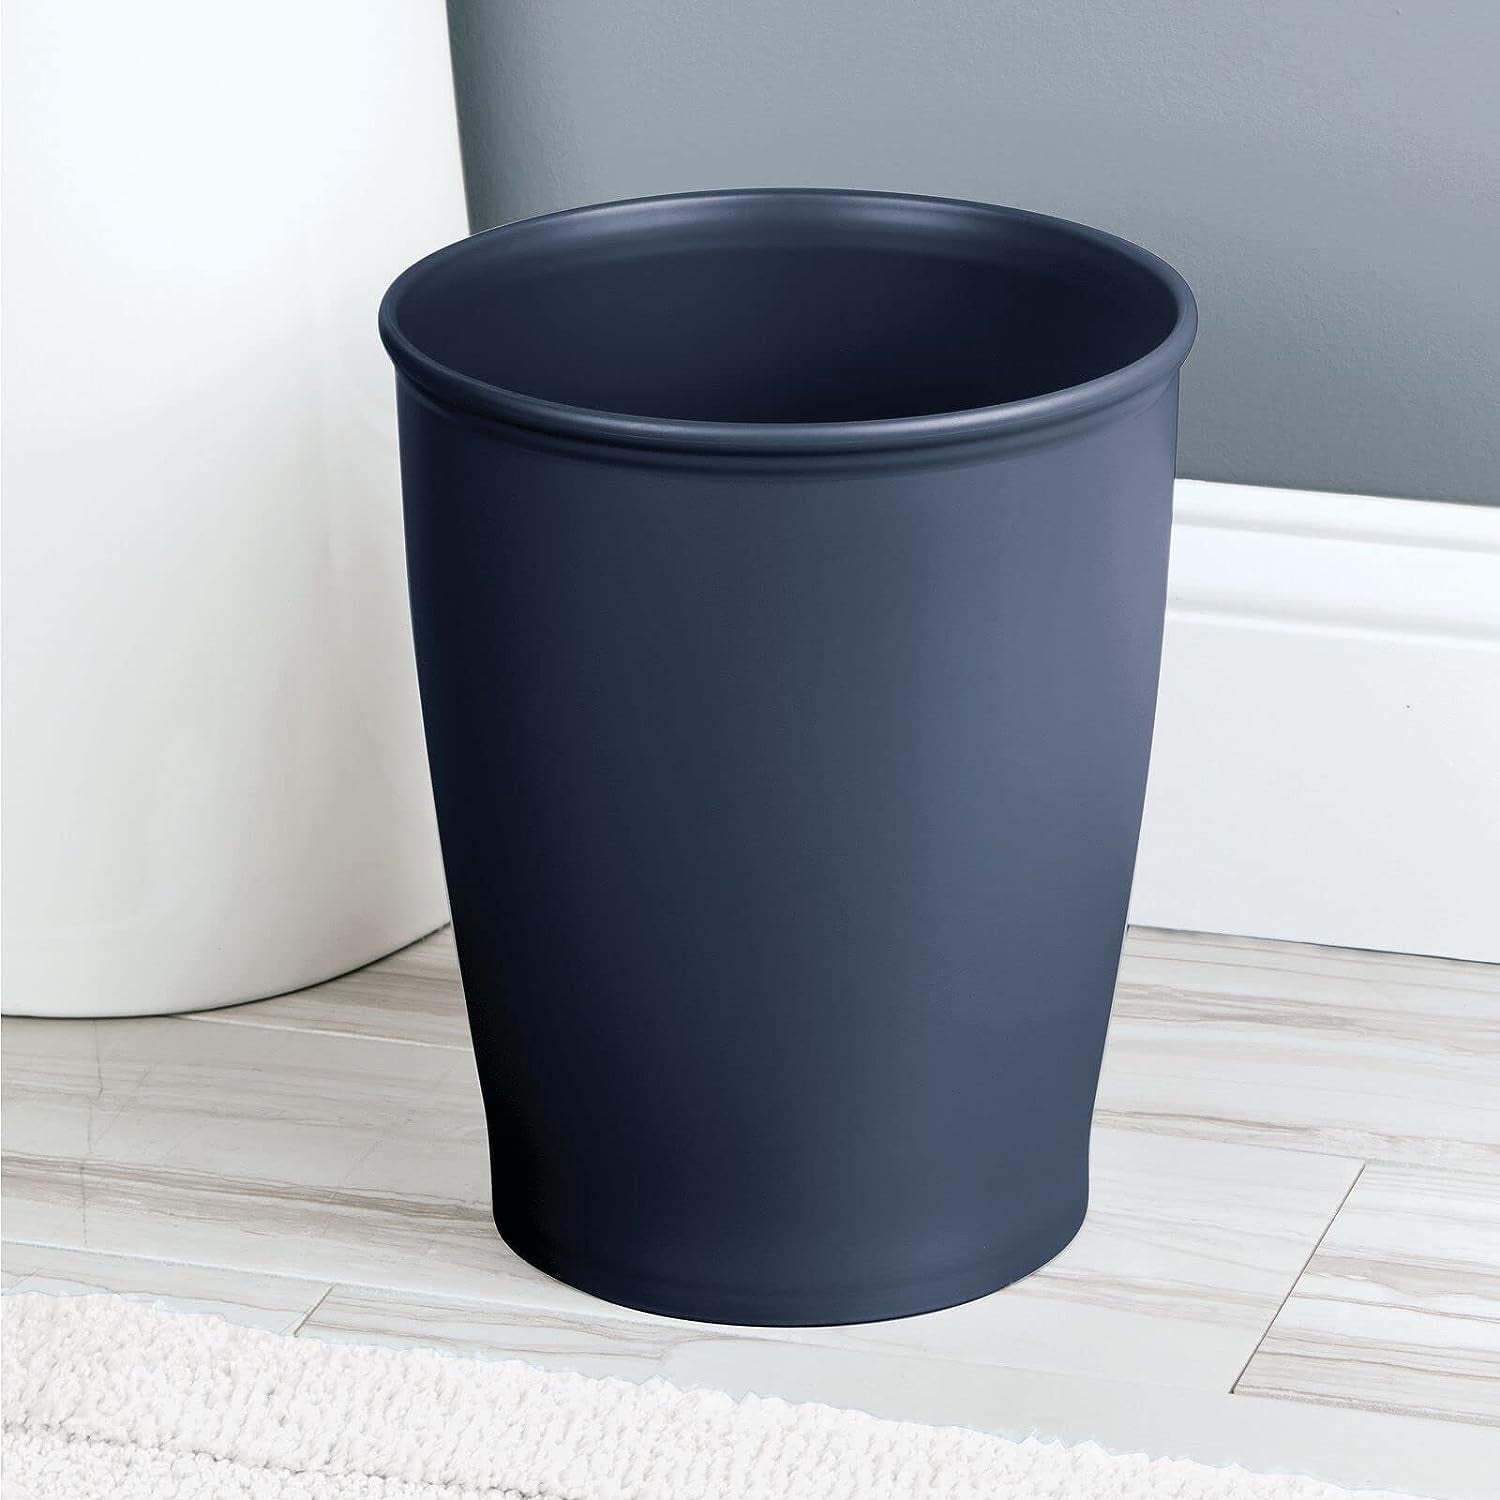 mDesign Small Plastic Bathroom Garbage Can - 1.6 Gallon Trash Can, 2 Pack - Navy Blue